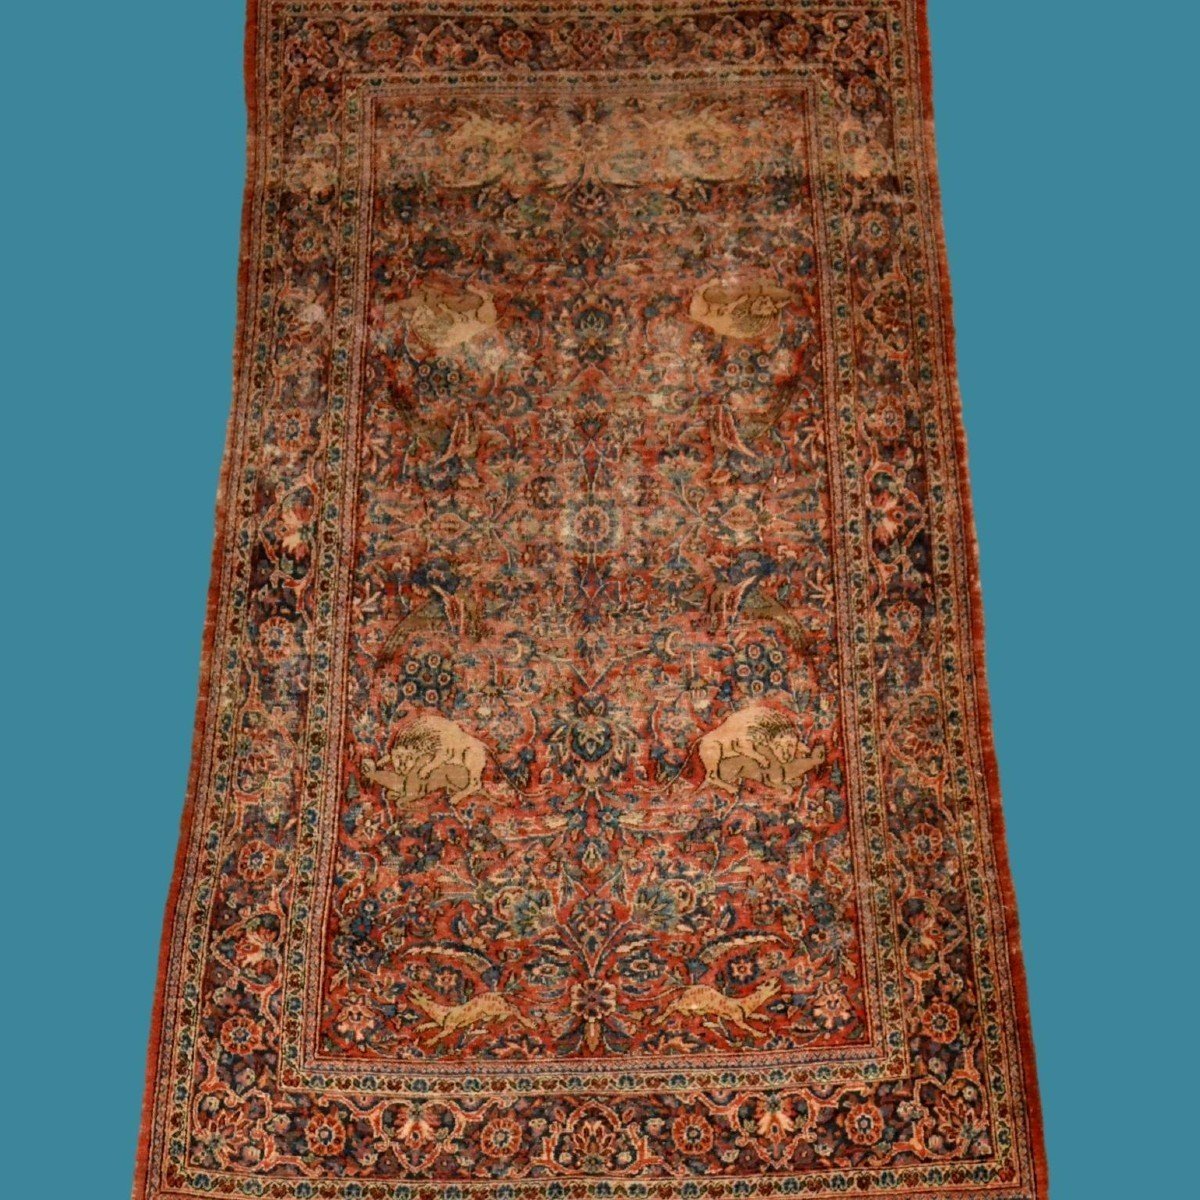 Antique Isfahan Rug With Hunting Scene, 124 X 203 Cm, Hand-knotted Wool In Persia In The 19th-photo-7